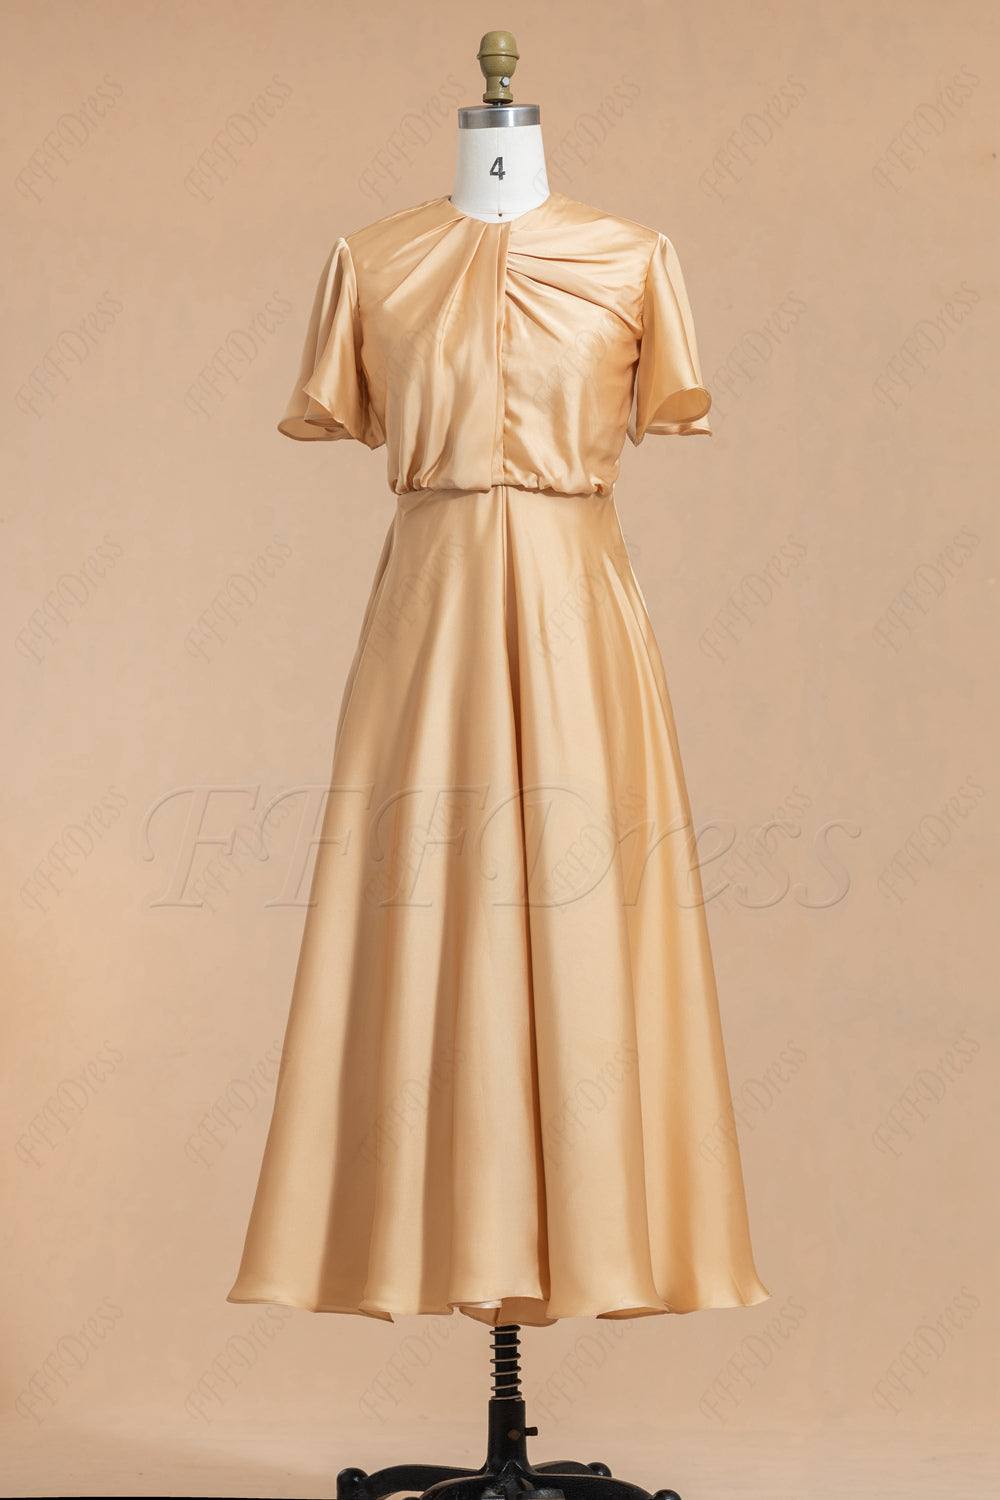 Rustic Gold midi bridesmaid dresses with sleeves